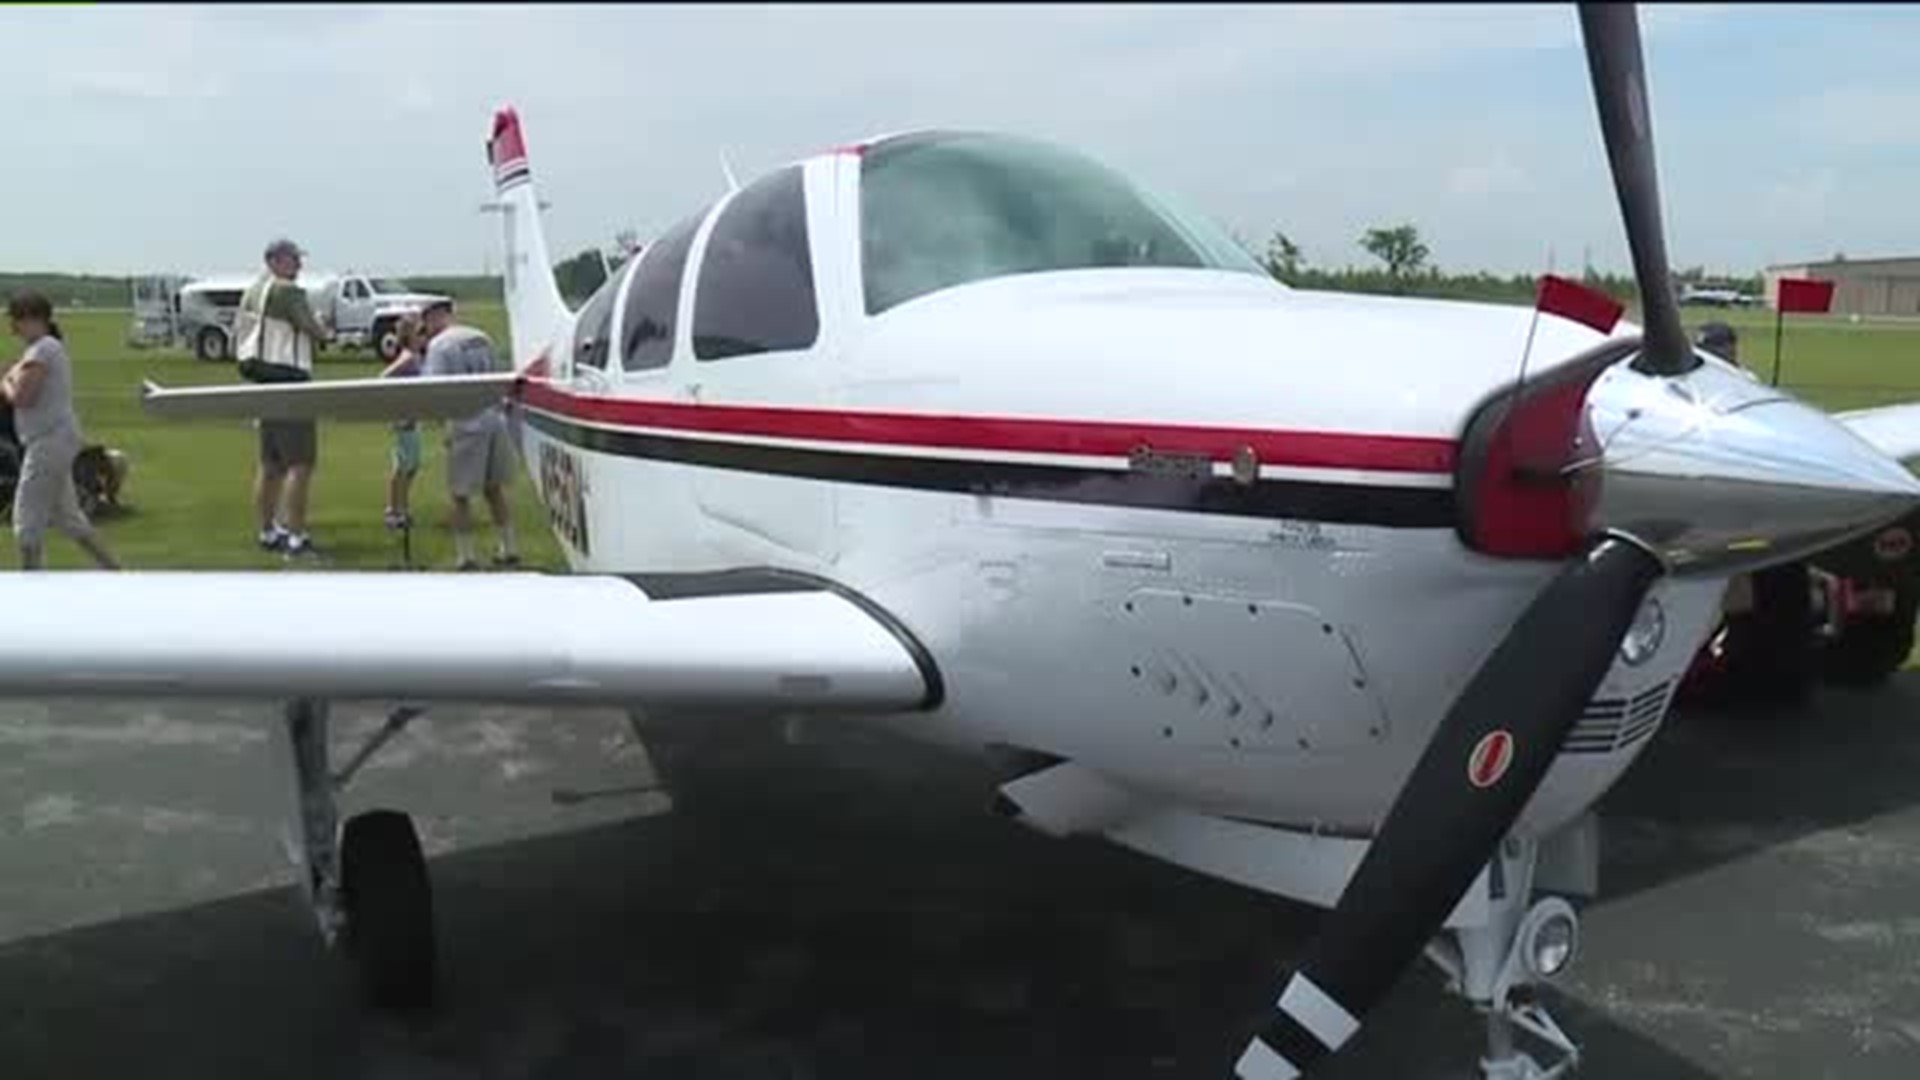 Community Aviation Day: A Memorial Day Tradition